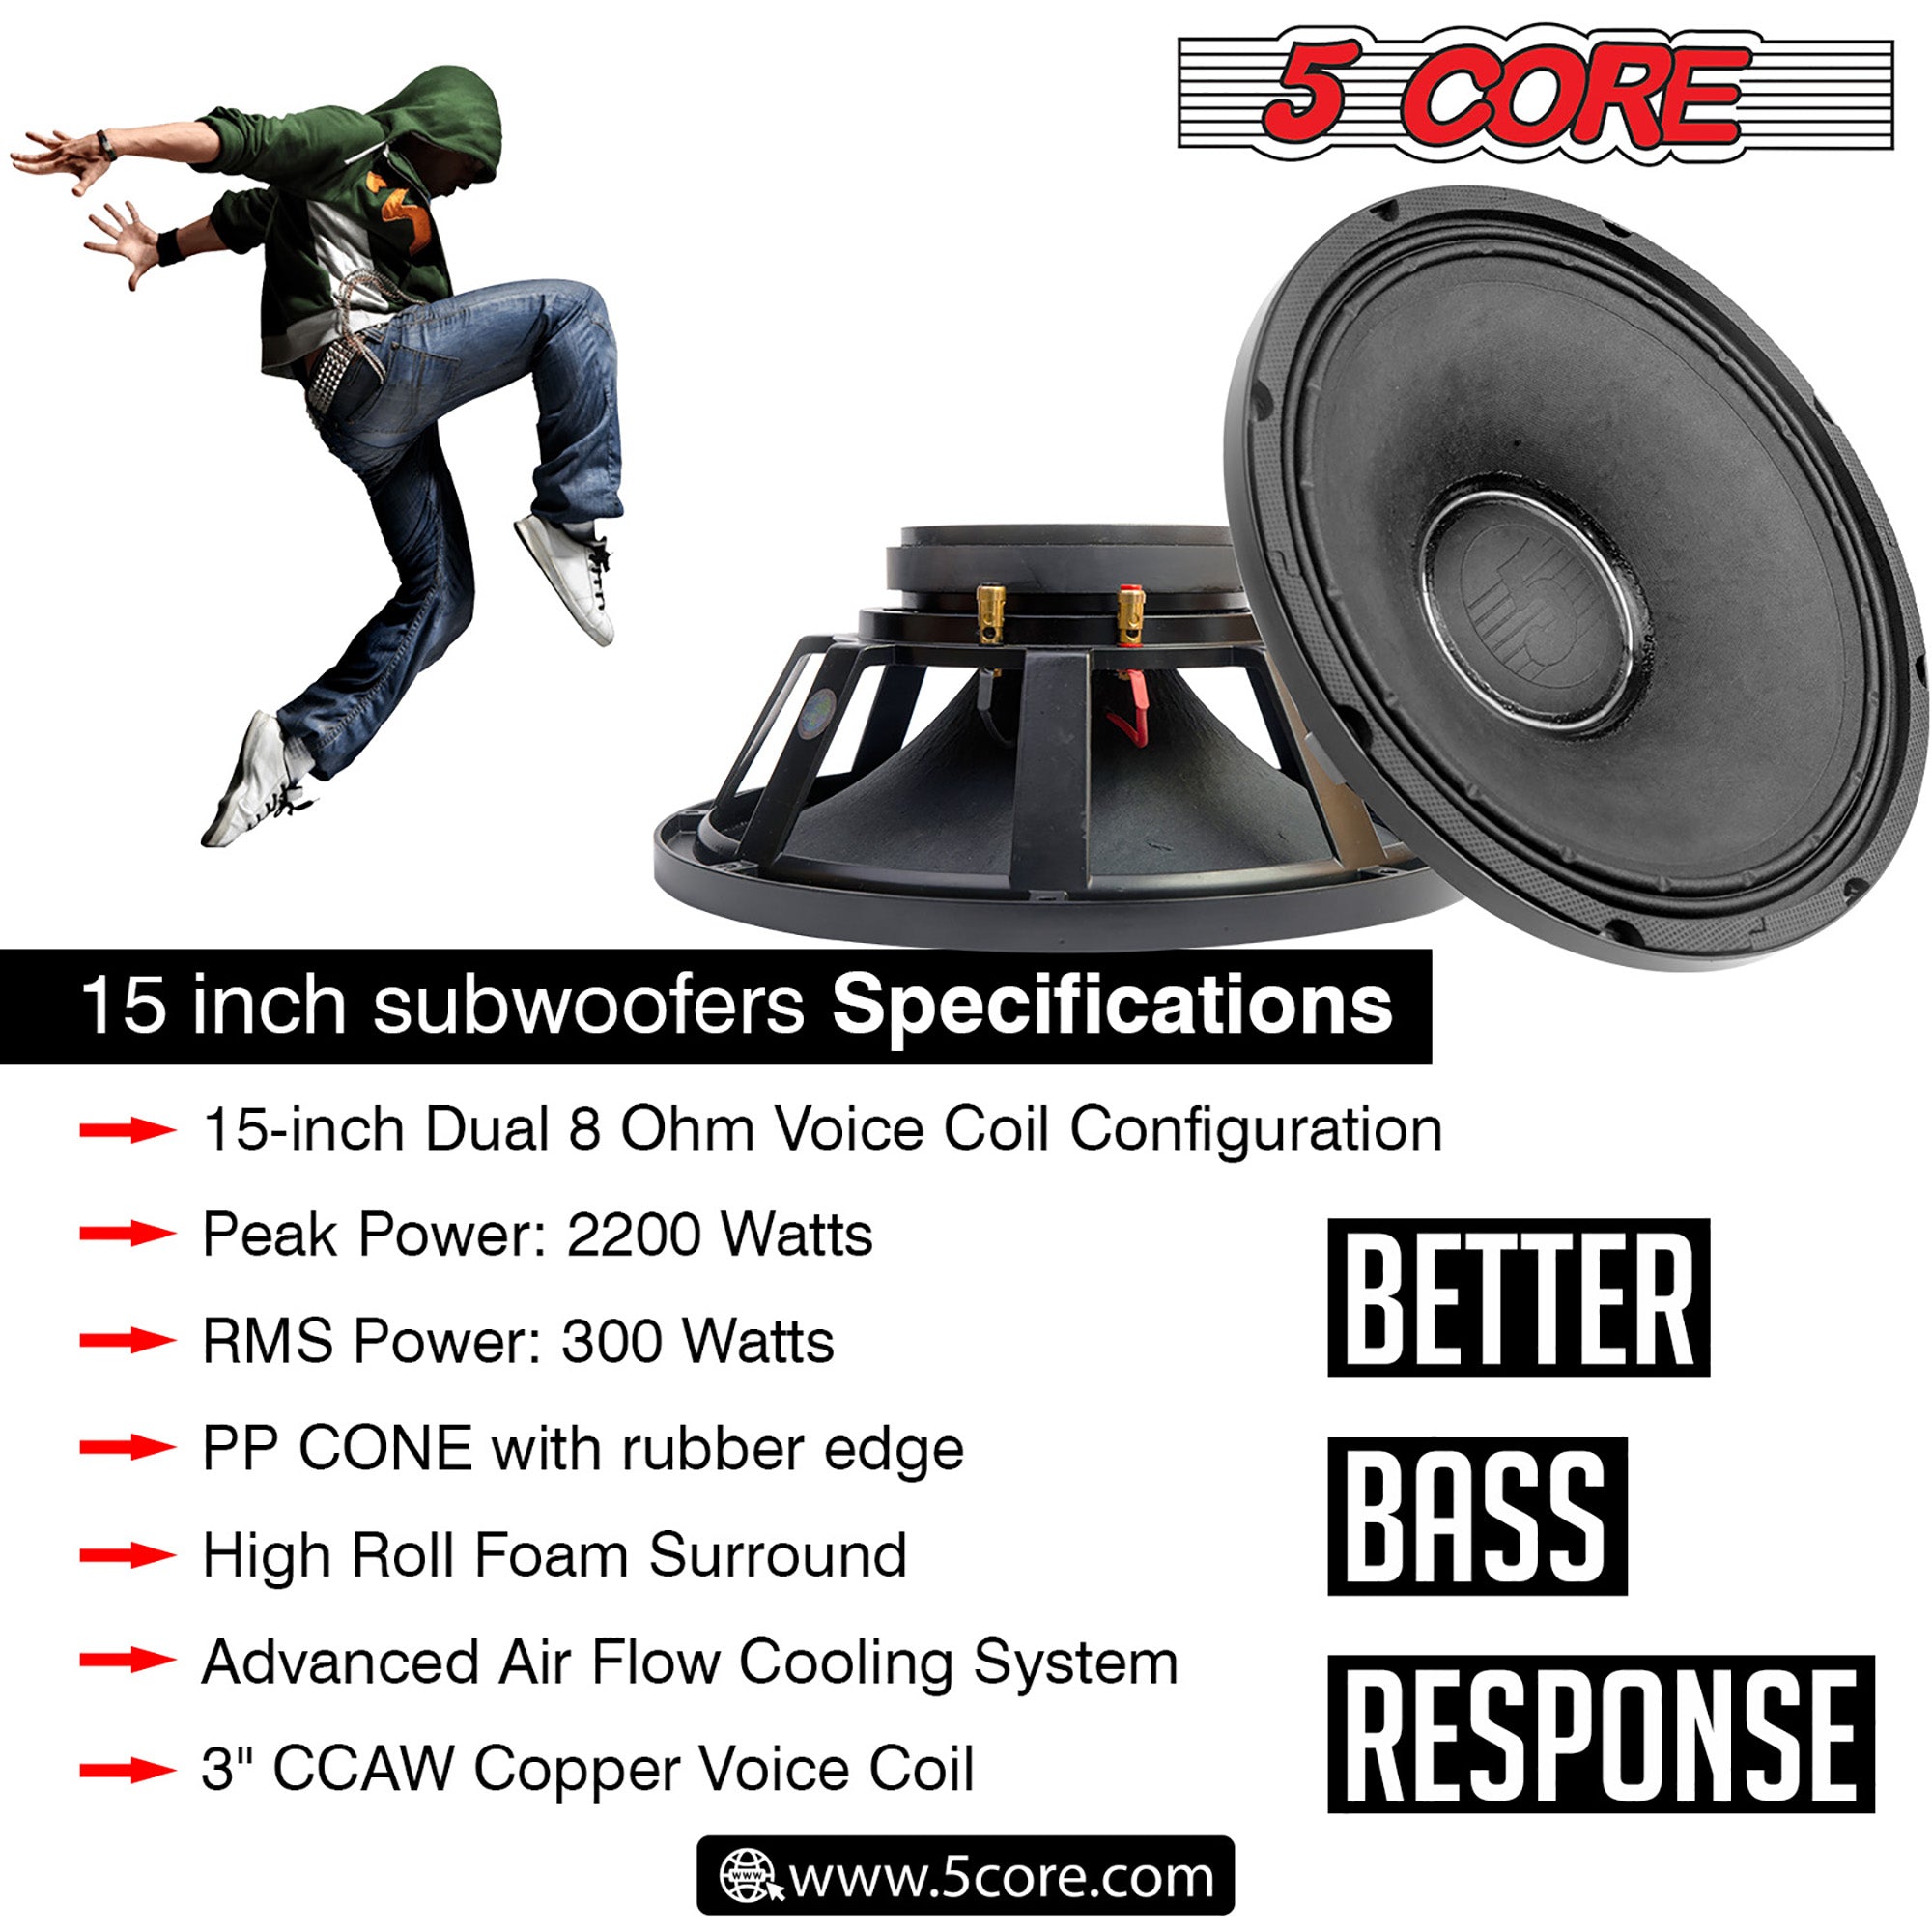 Specifications of 15 Inch Subwoofer Speaker